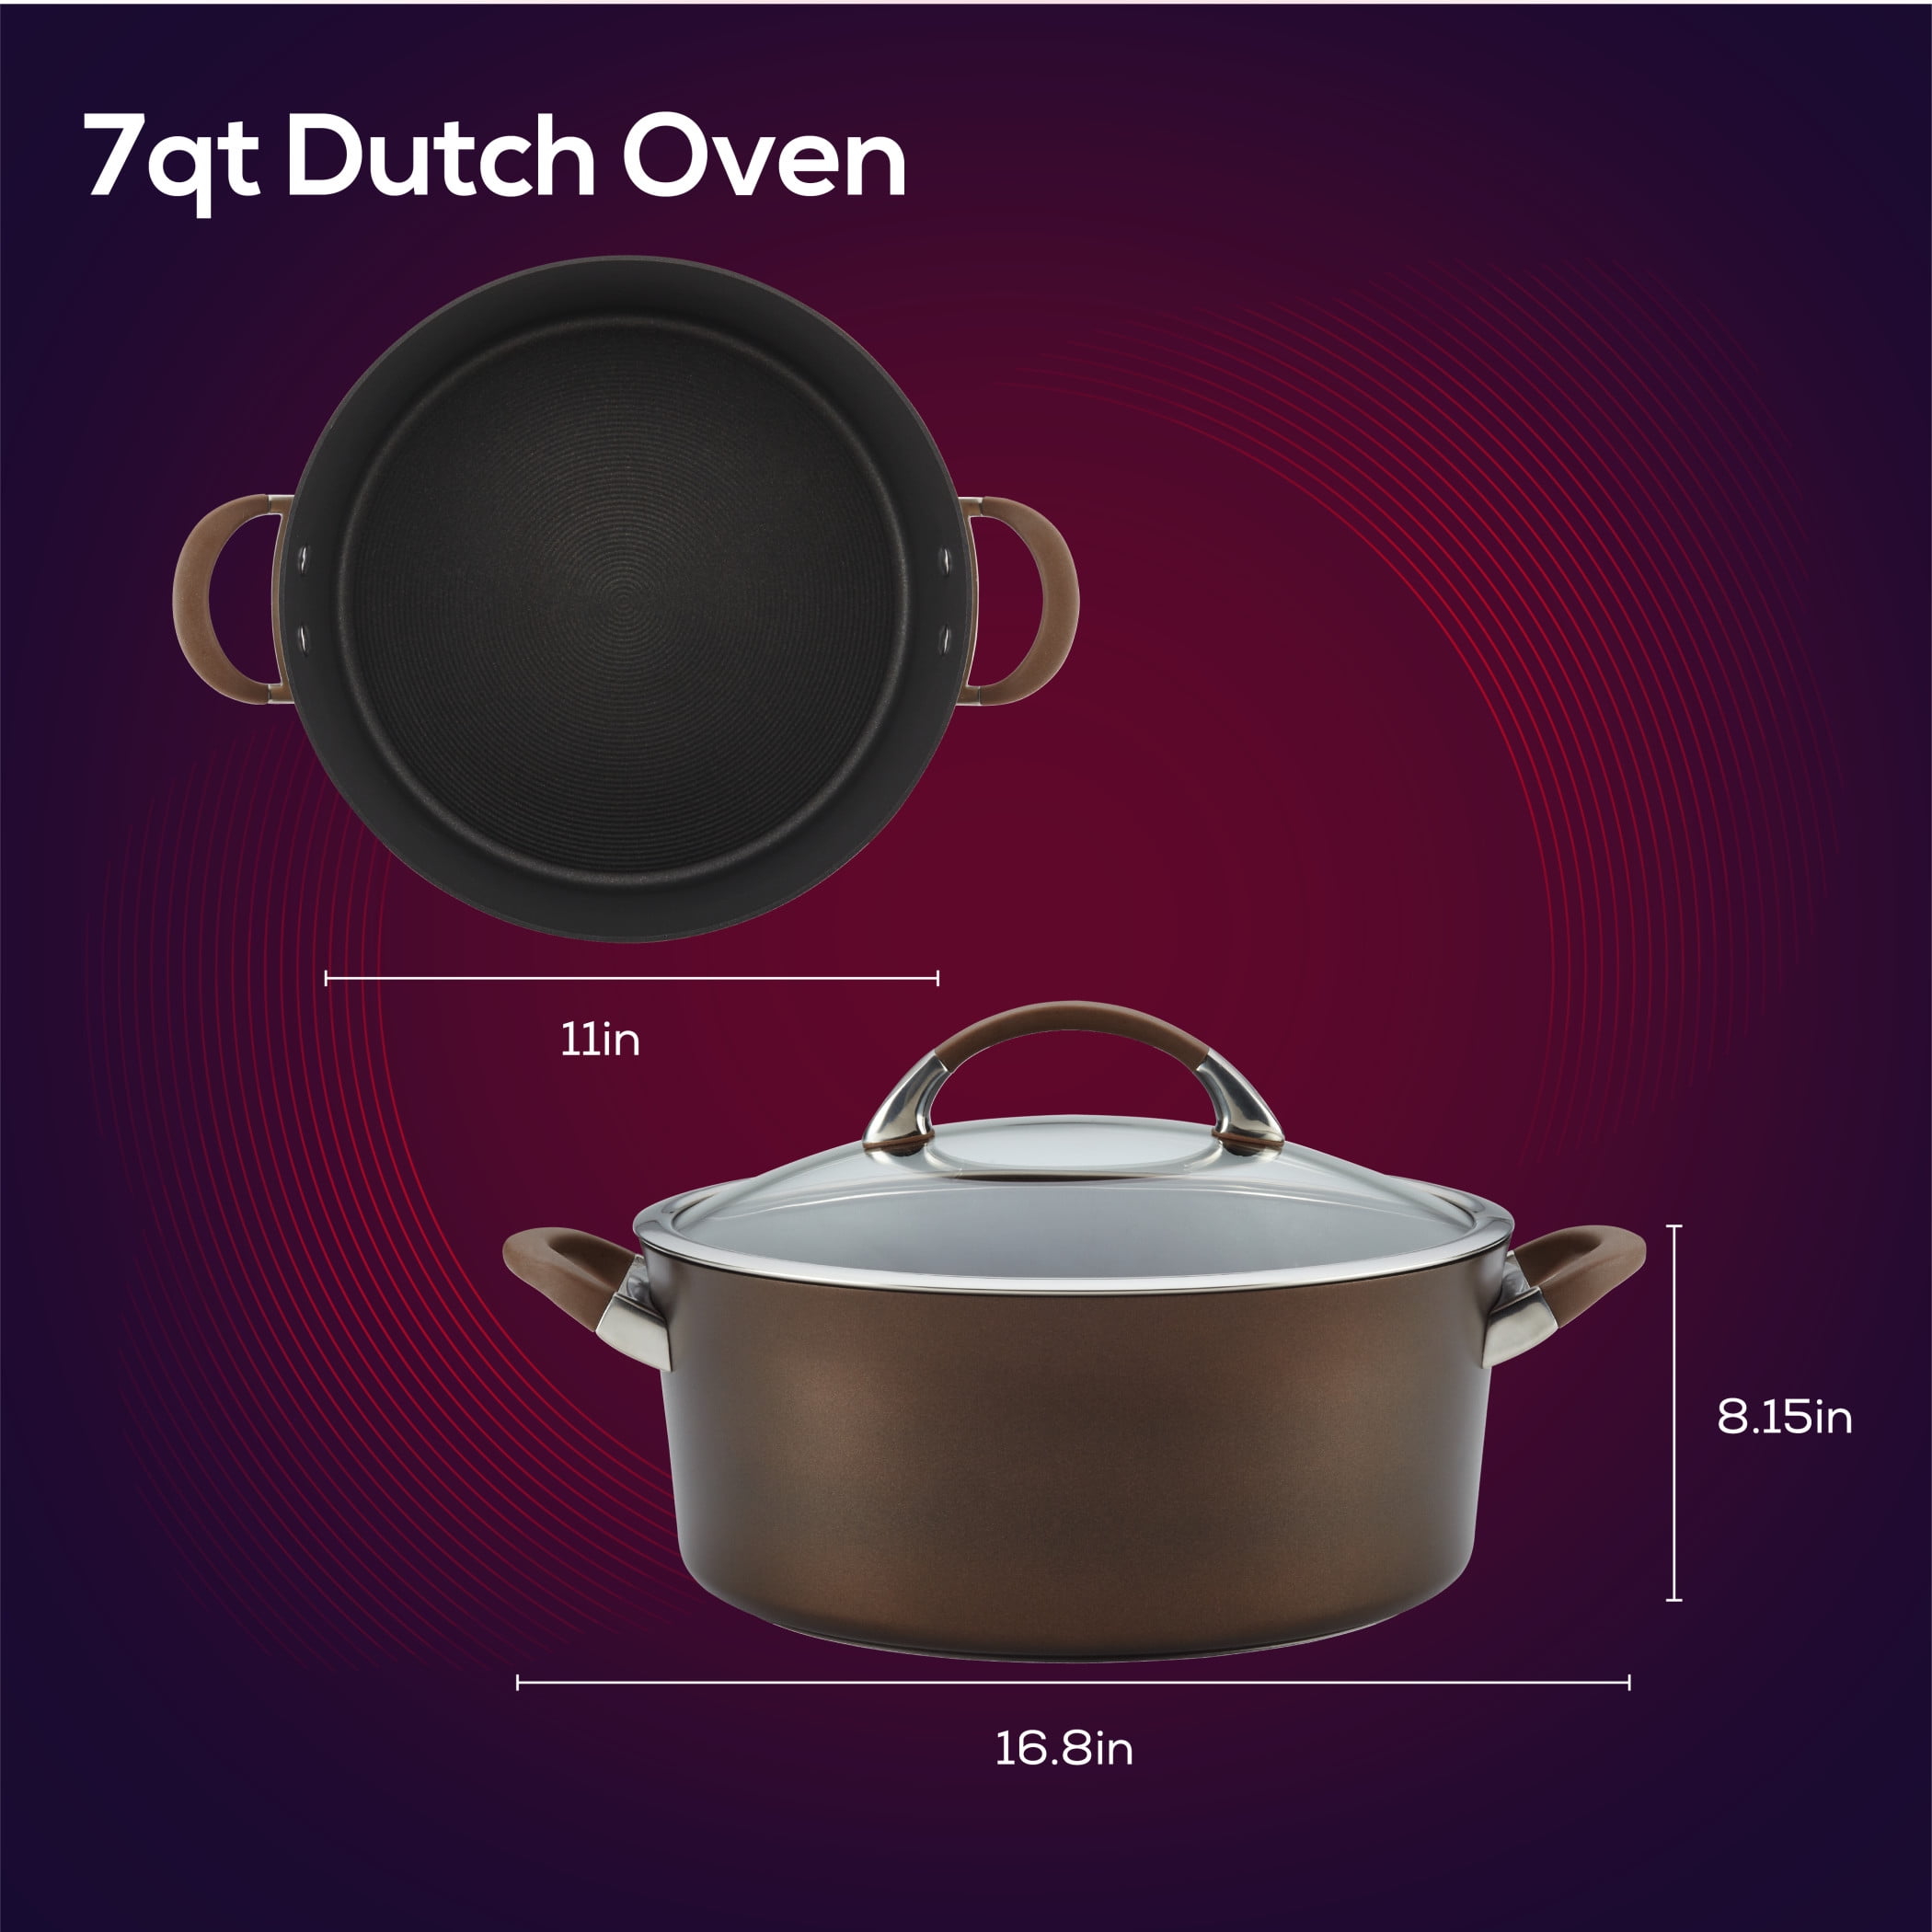 Circulon Symmetry Hard-Anodized Nonstick Induction Dutch Oven with